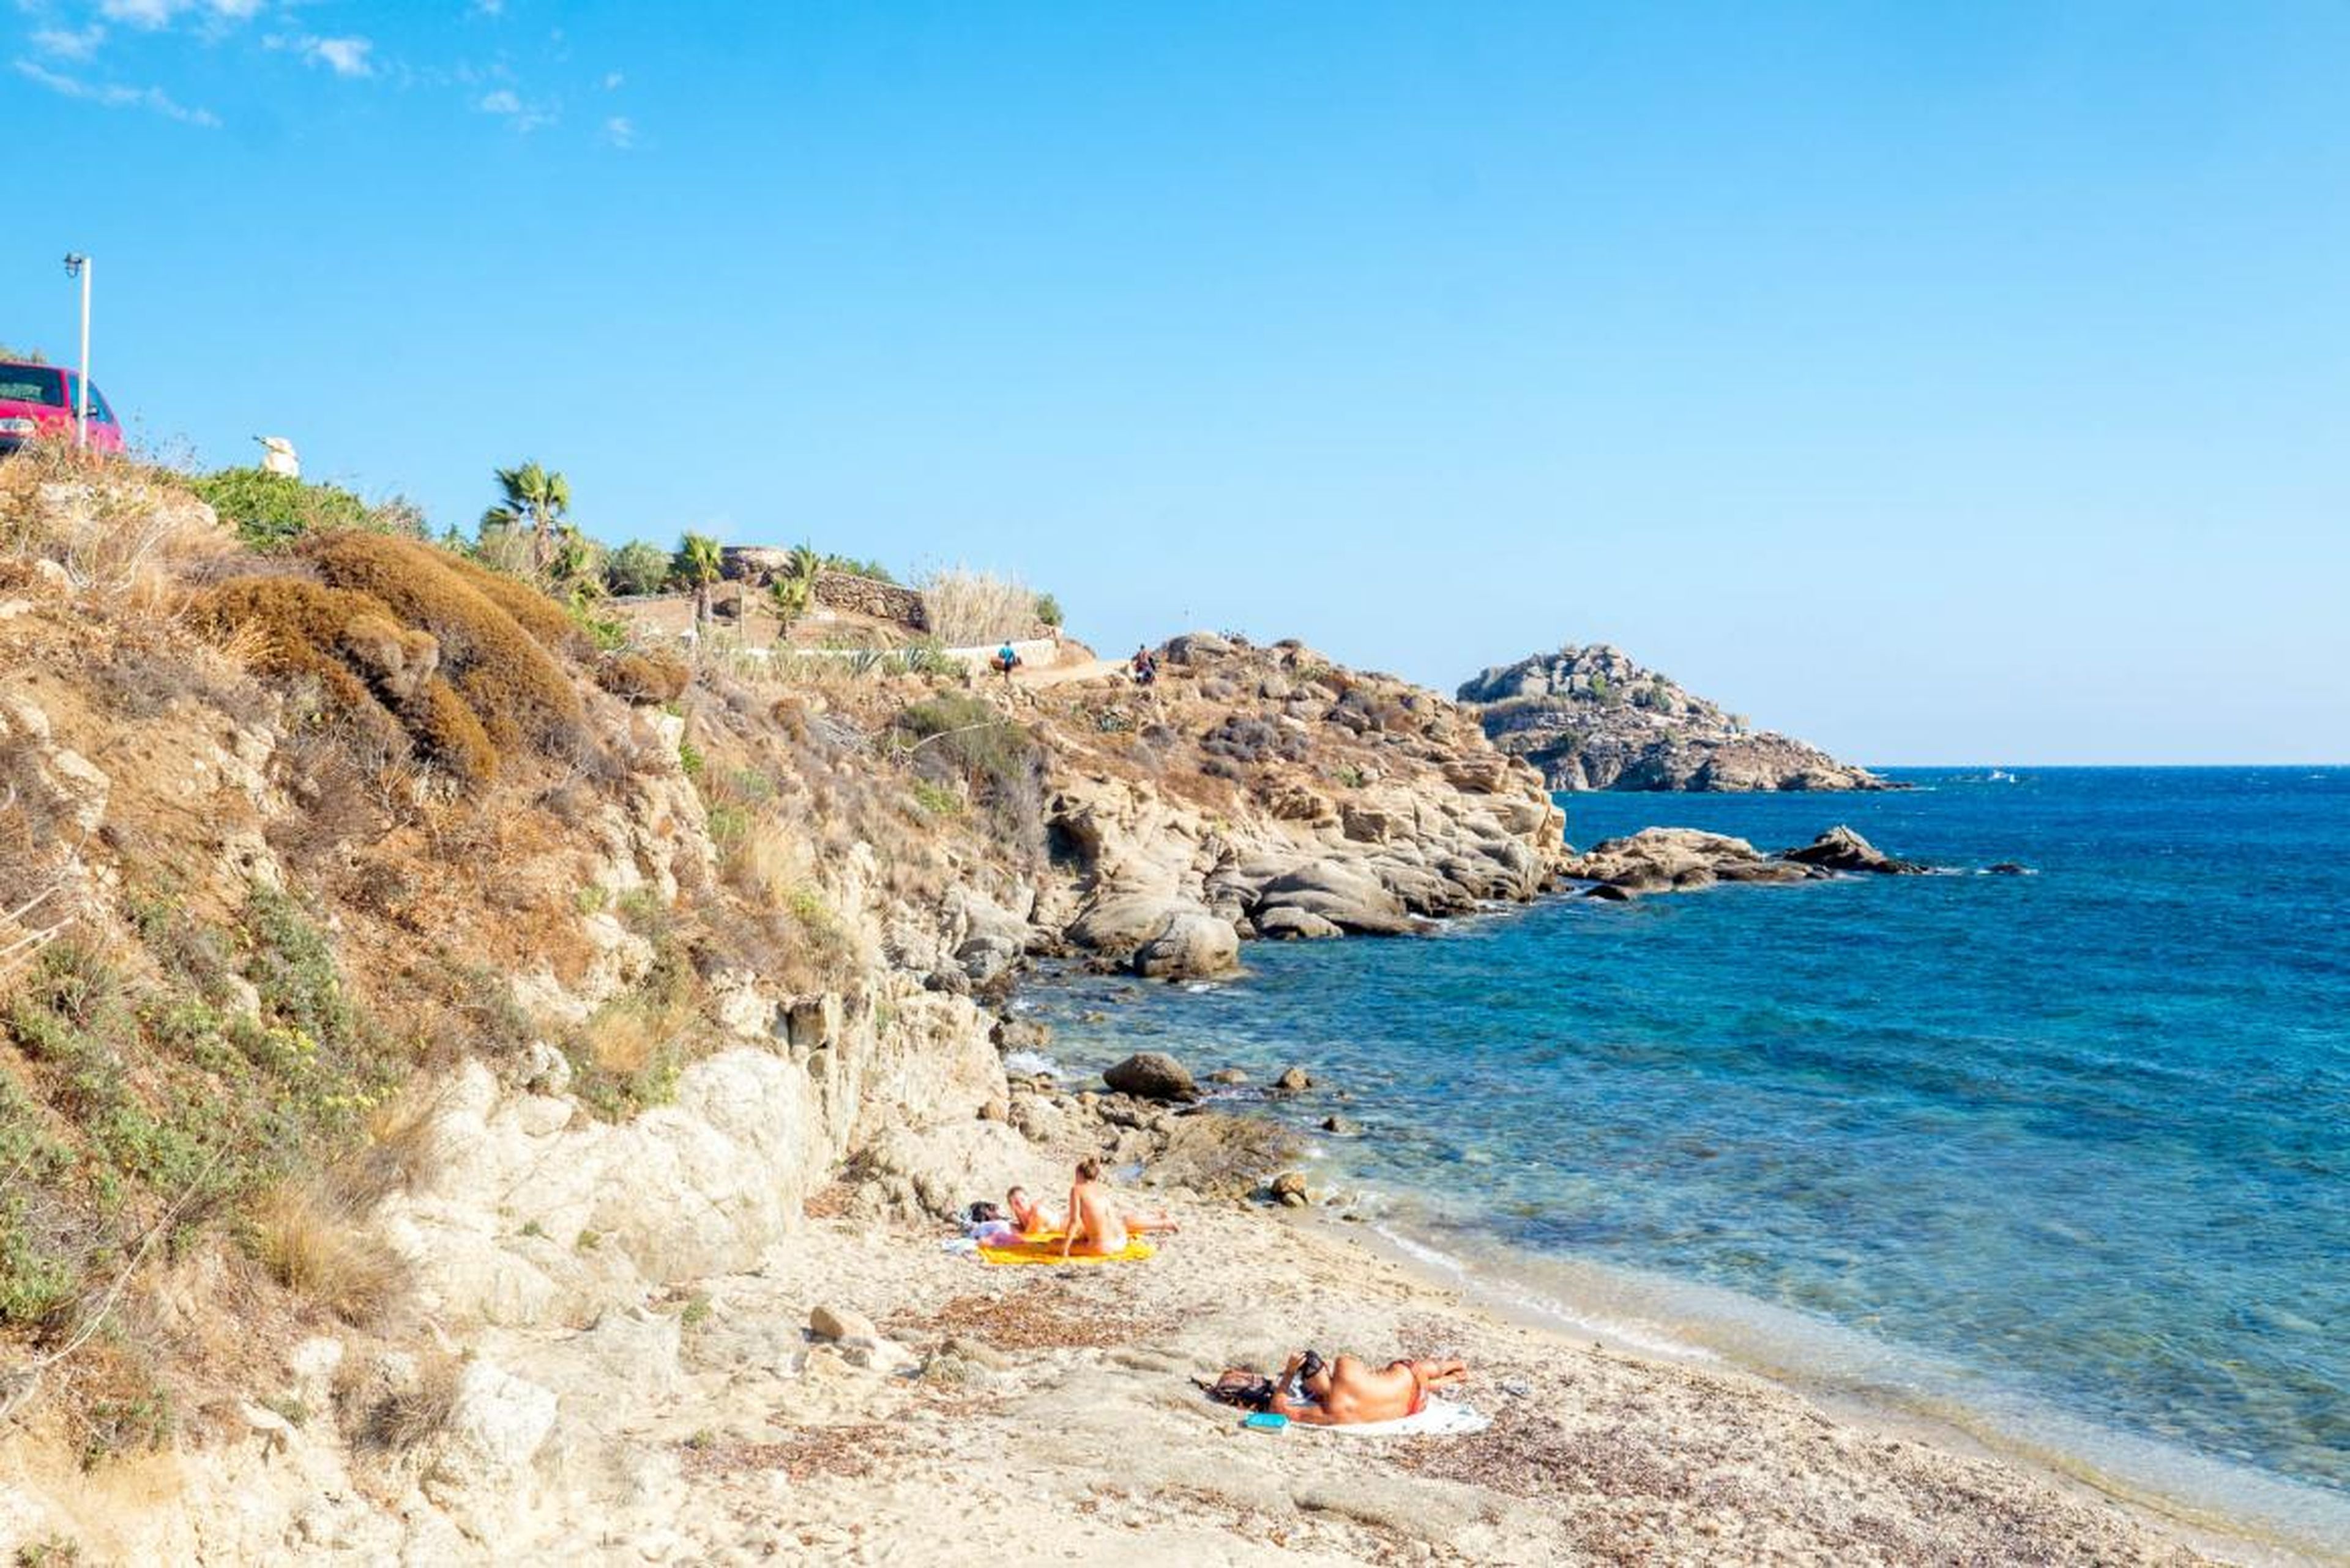 Mykonos has 25 beaches strewn along its coast, each with a different vibe. The beaches on the island's north coast are known for being much quieter and nudist-friendly. No matter what you are looking for, you can probably find it.